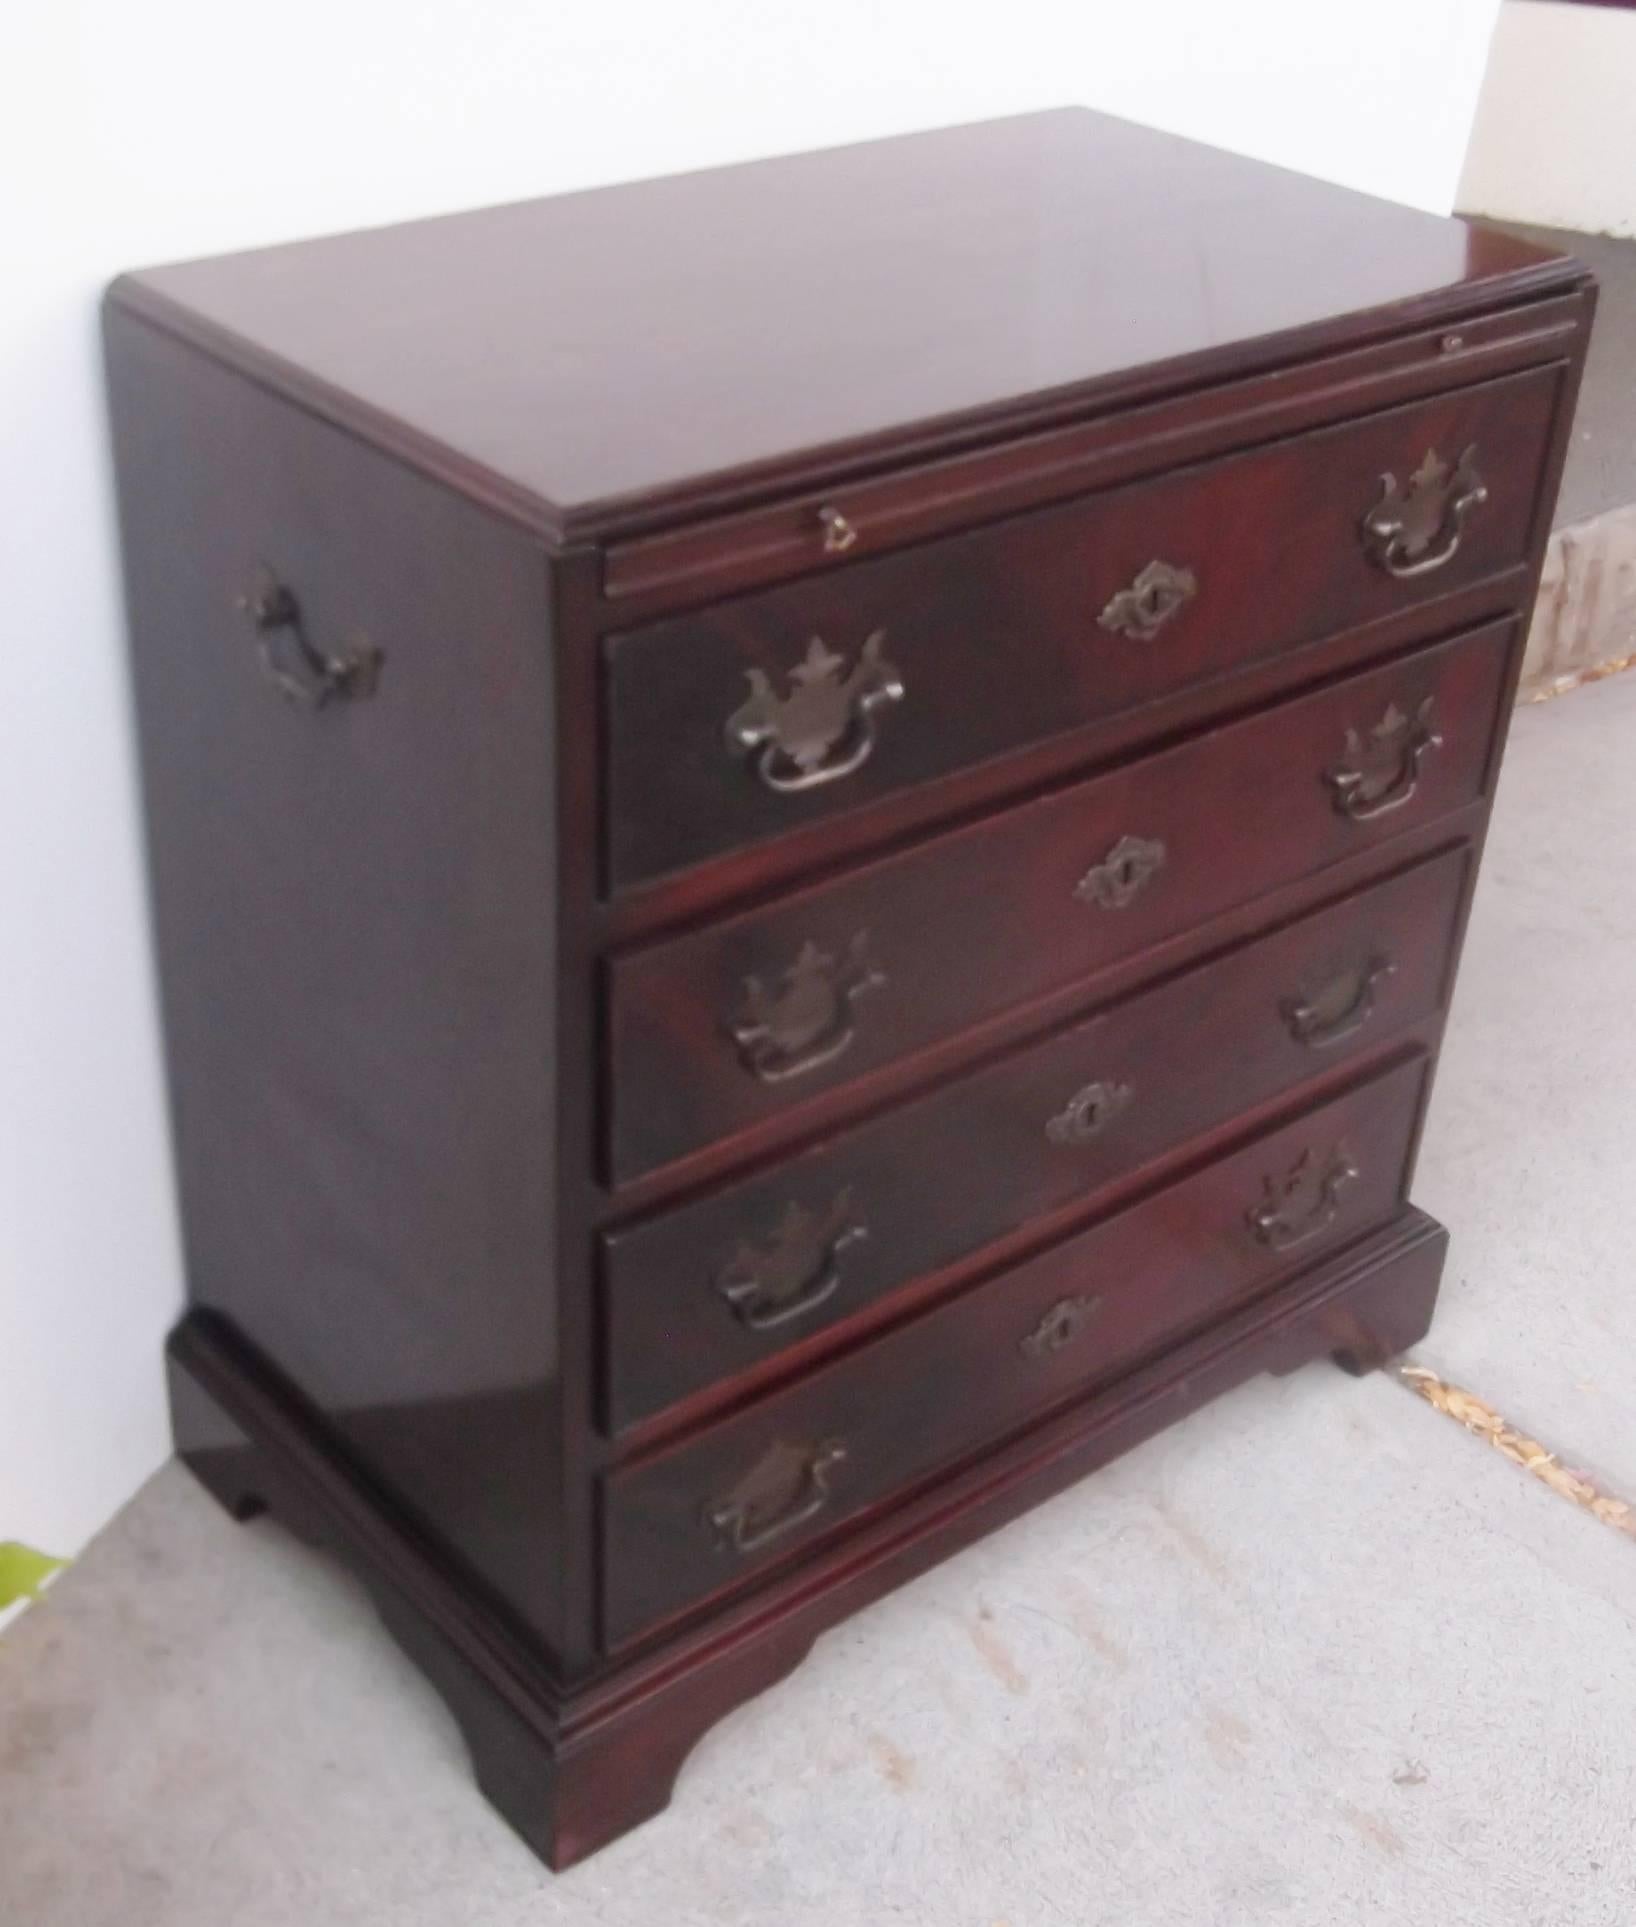 A pair of mahogany bachelors chests with leather topped pull-out tray.
Four drawers under the pull-out tray resting on four bracket feet. The finish has been newly cleaned and rubbed out to even the color and shine but still the original finish